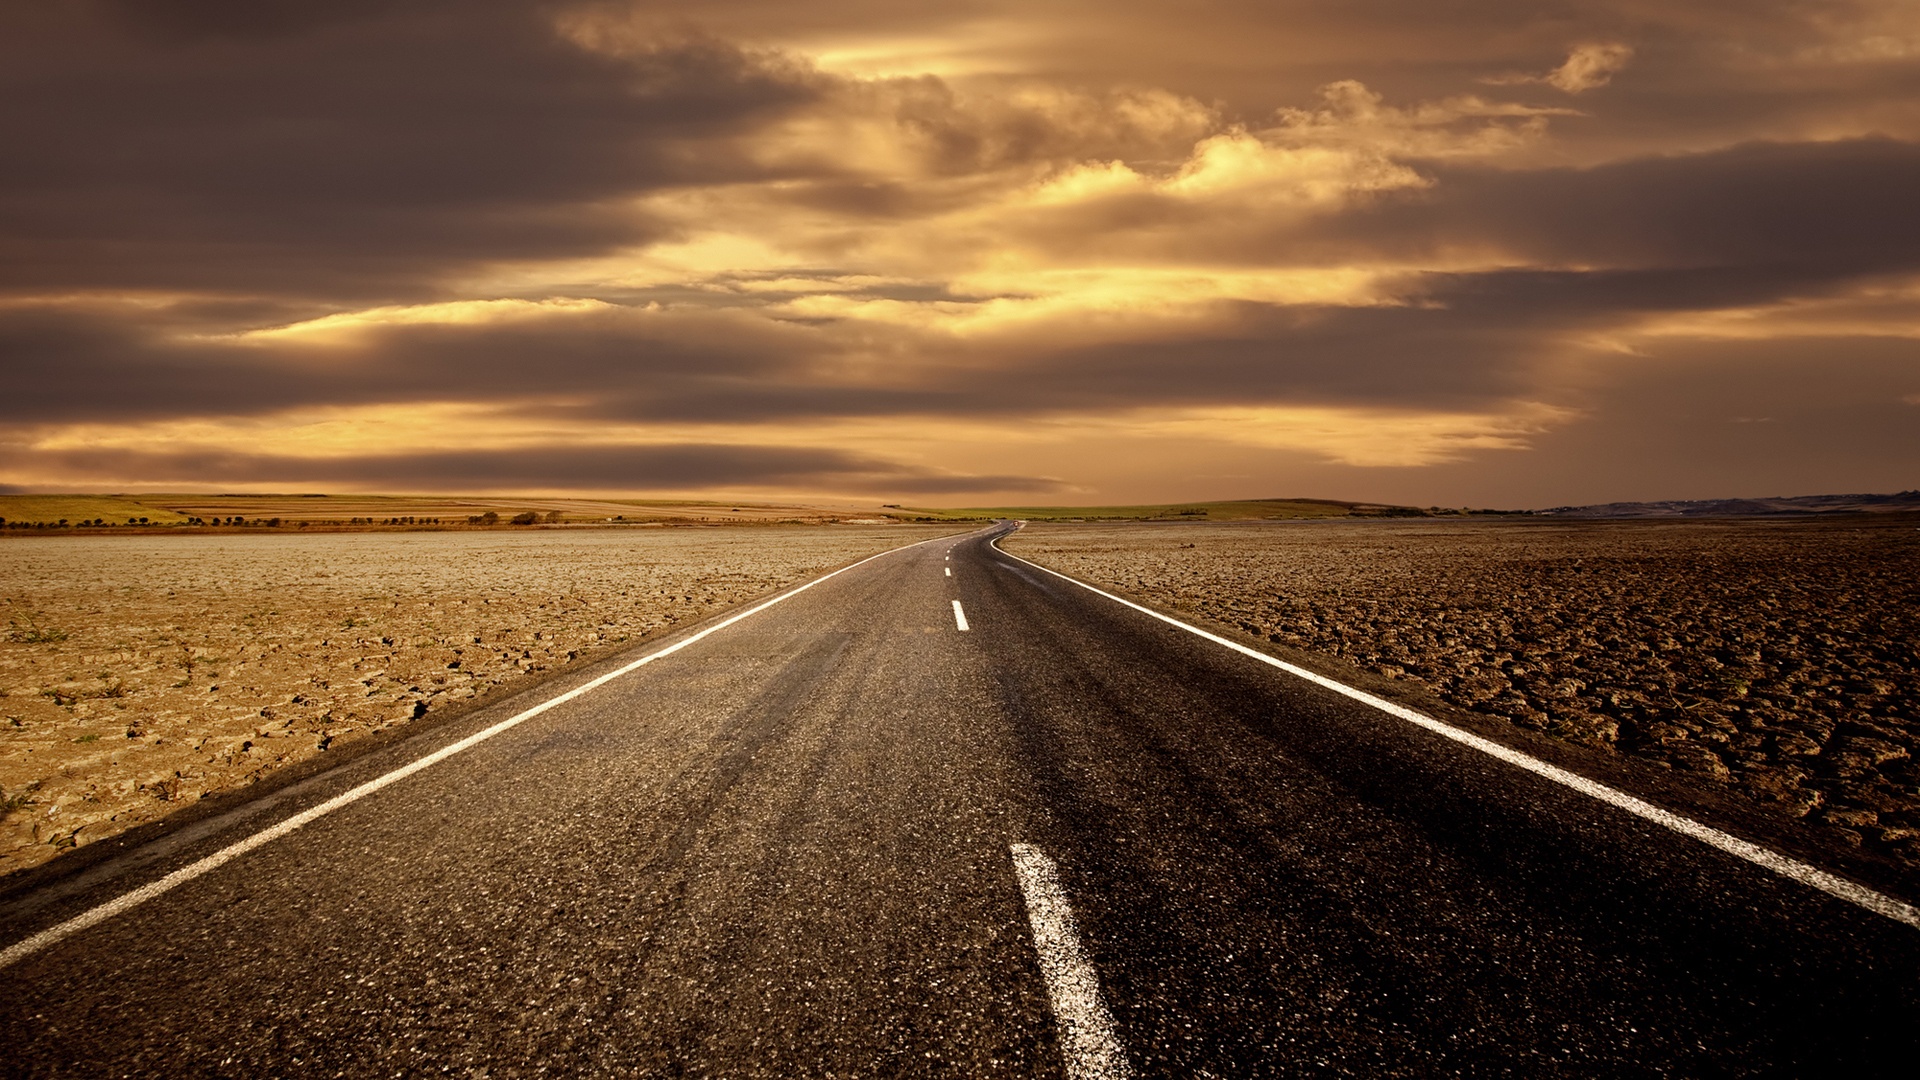 Road HD Wallpaper, Background Images